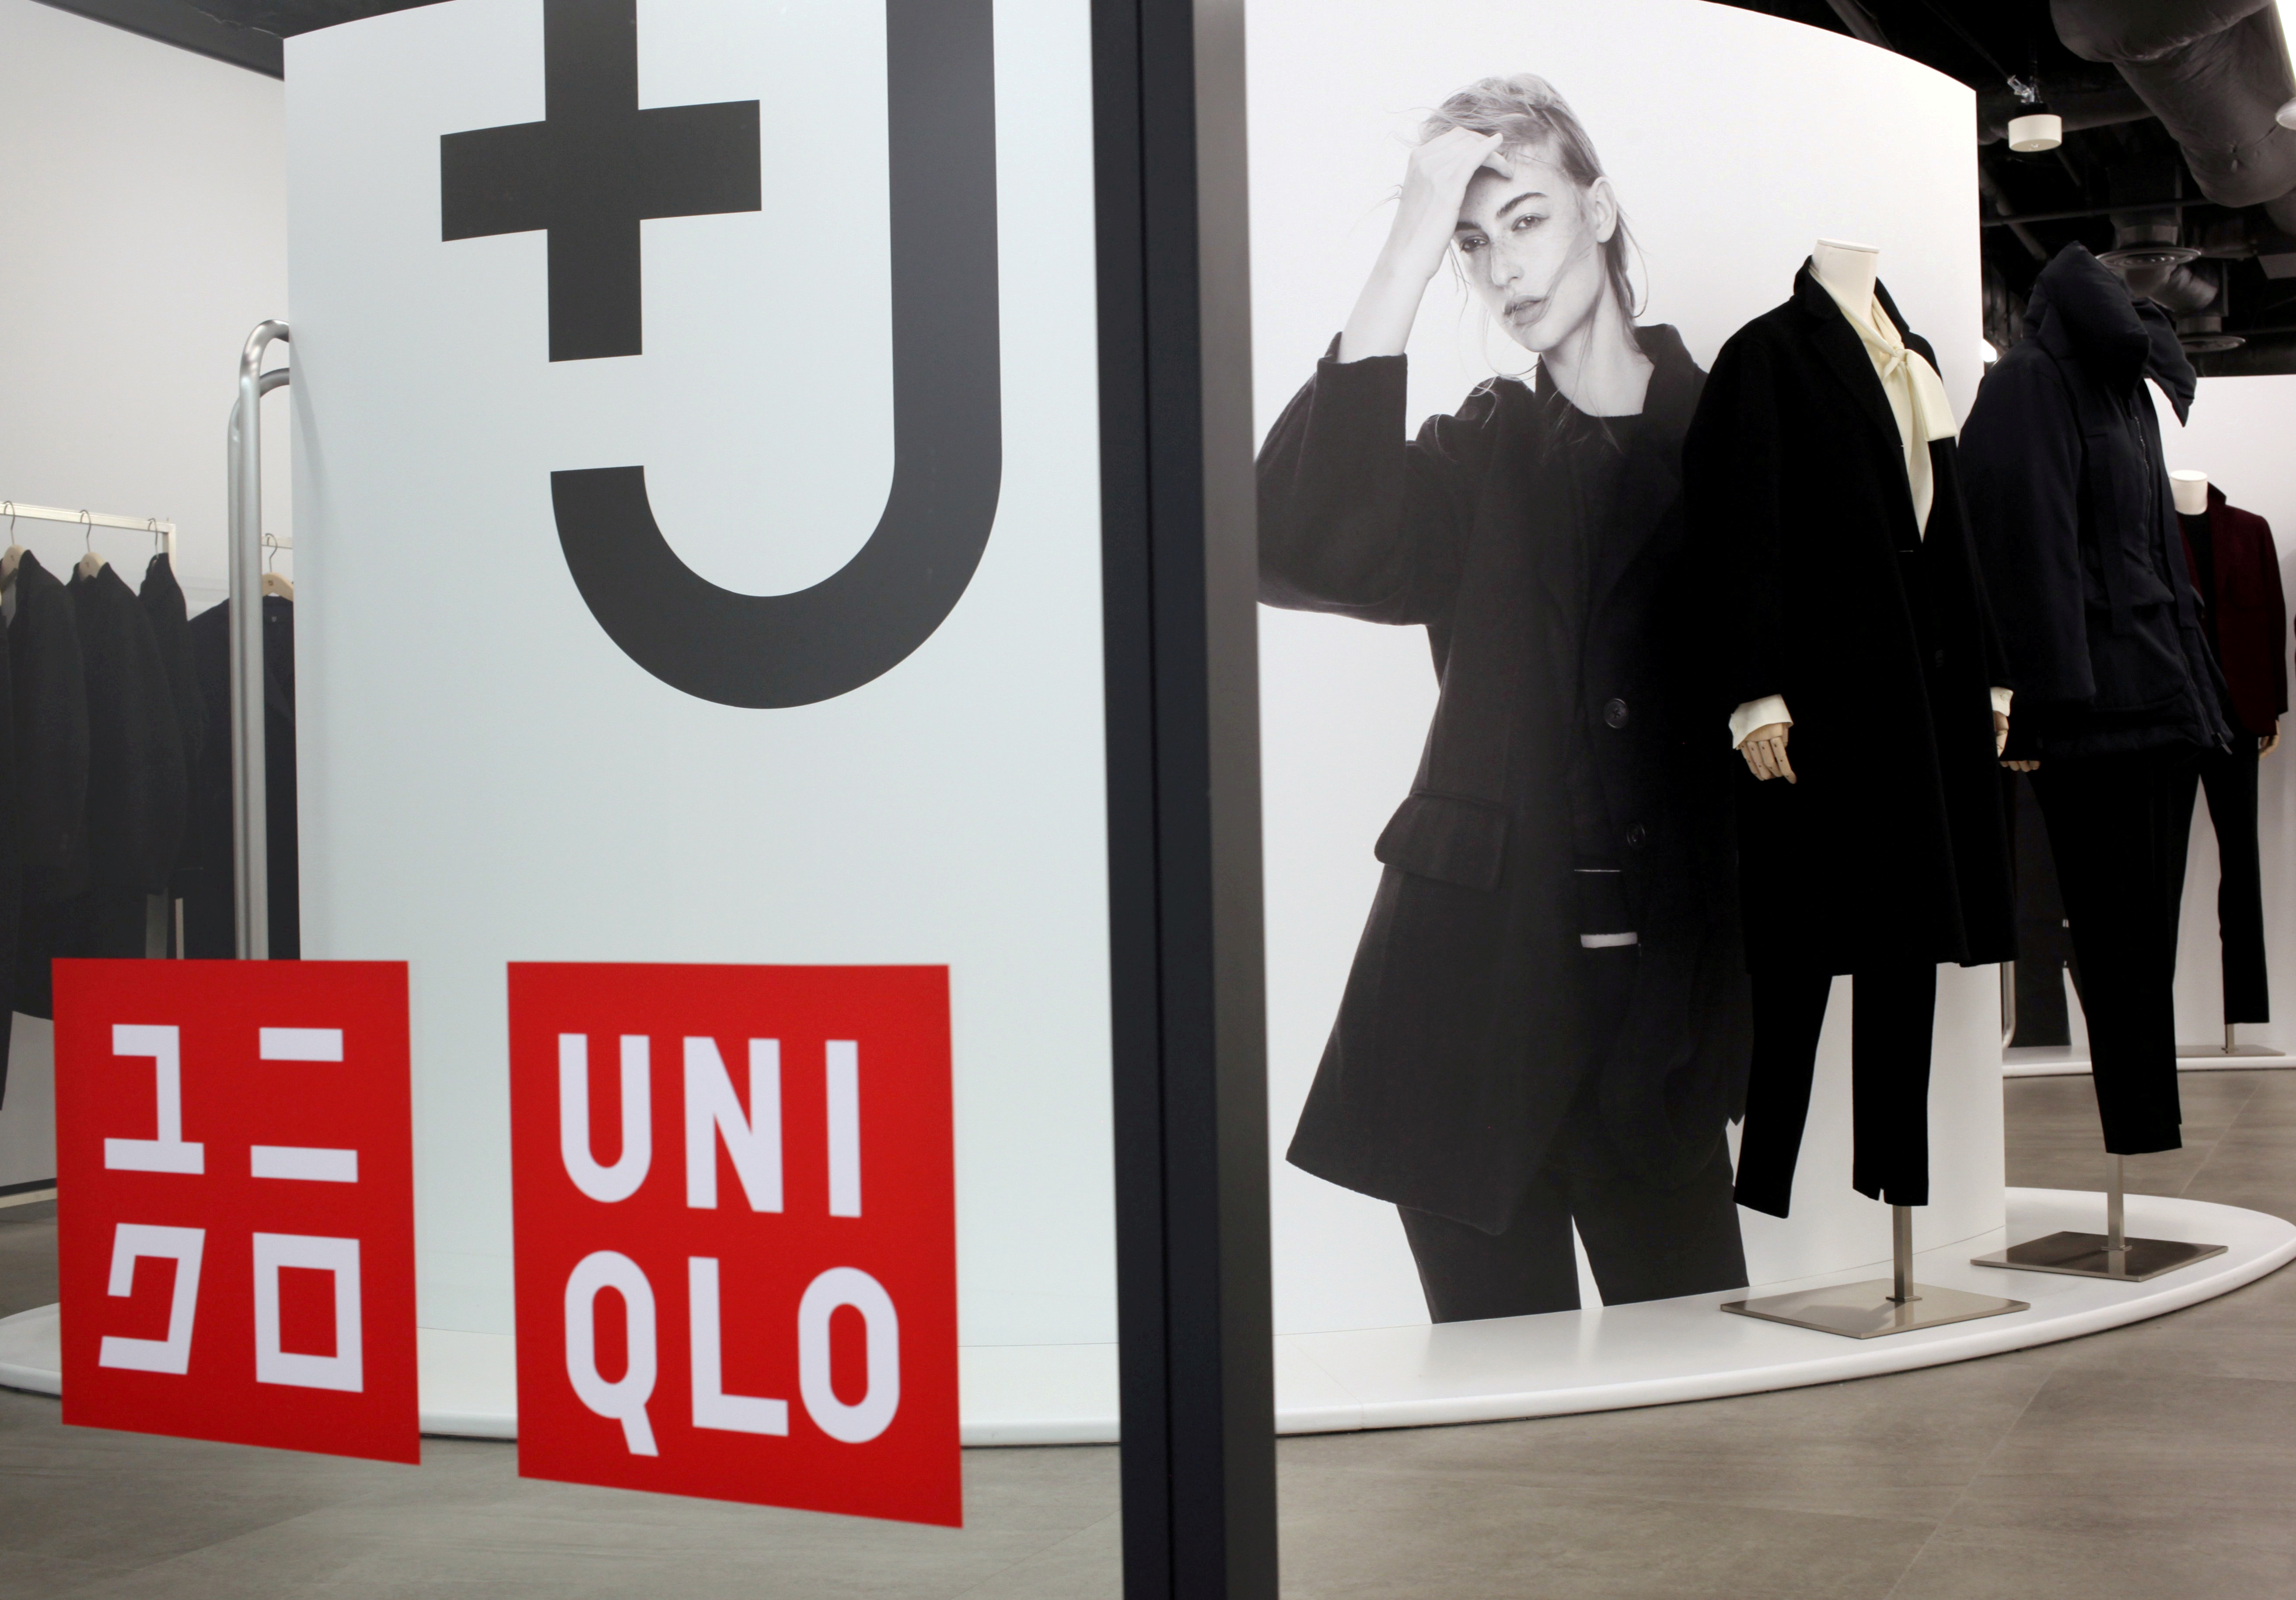 Clothes of the collaborative label +J from Uniqlo's new tie-up with German designer Jil Sander, are displayed at the retailer's press room in Tokyo, Japan November 6, 2020. REUTERS/Ritsuko Ando/File Photo